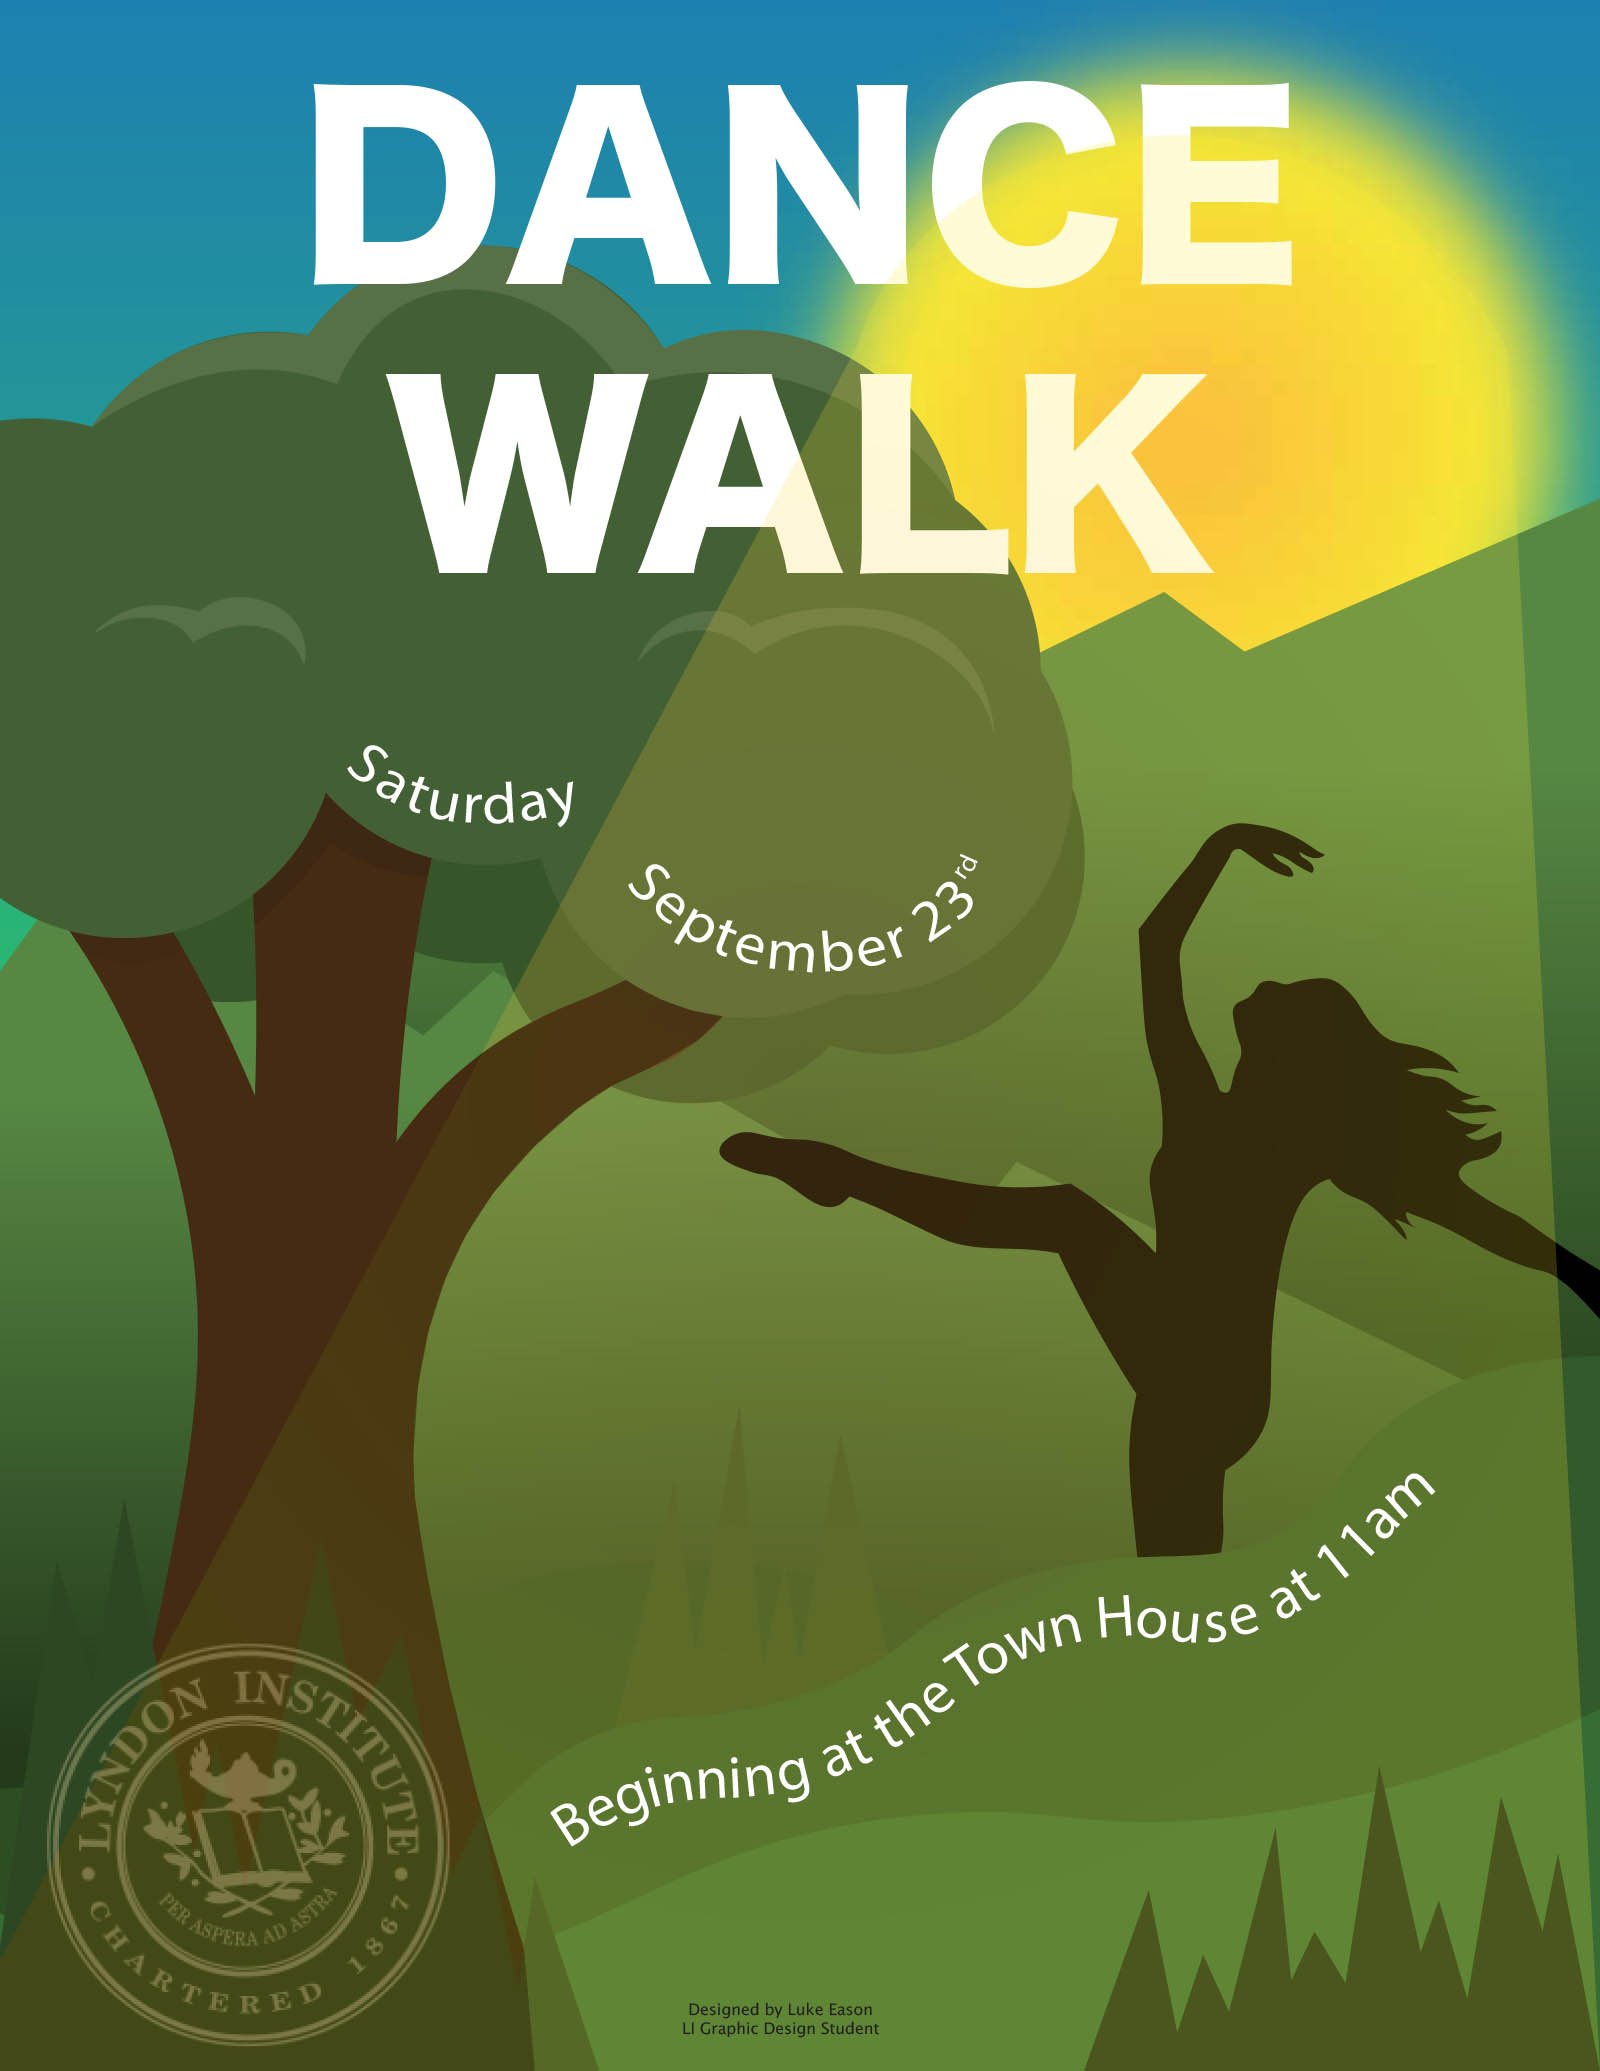 Poster for the LI dance students Dance Walk performance on 9/23/23 at 11 a.m.